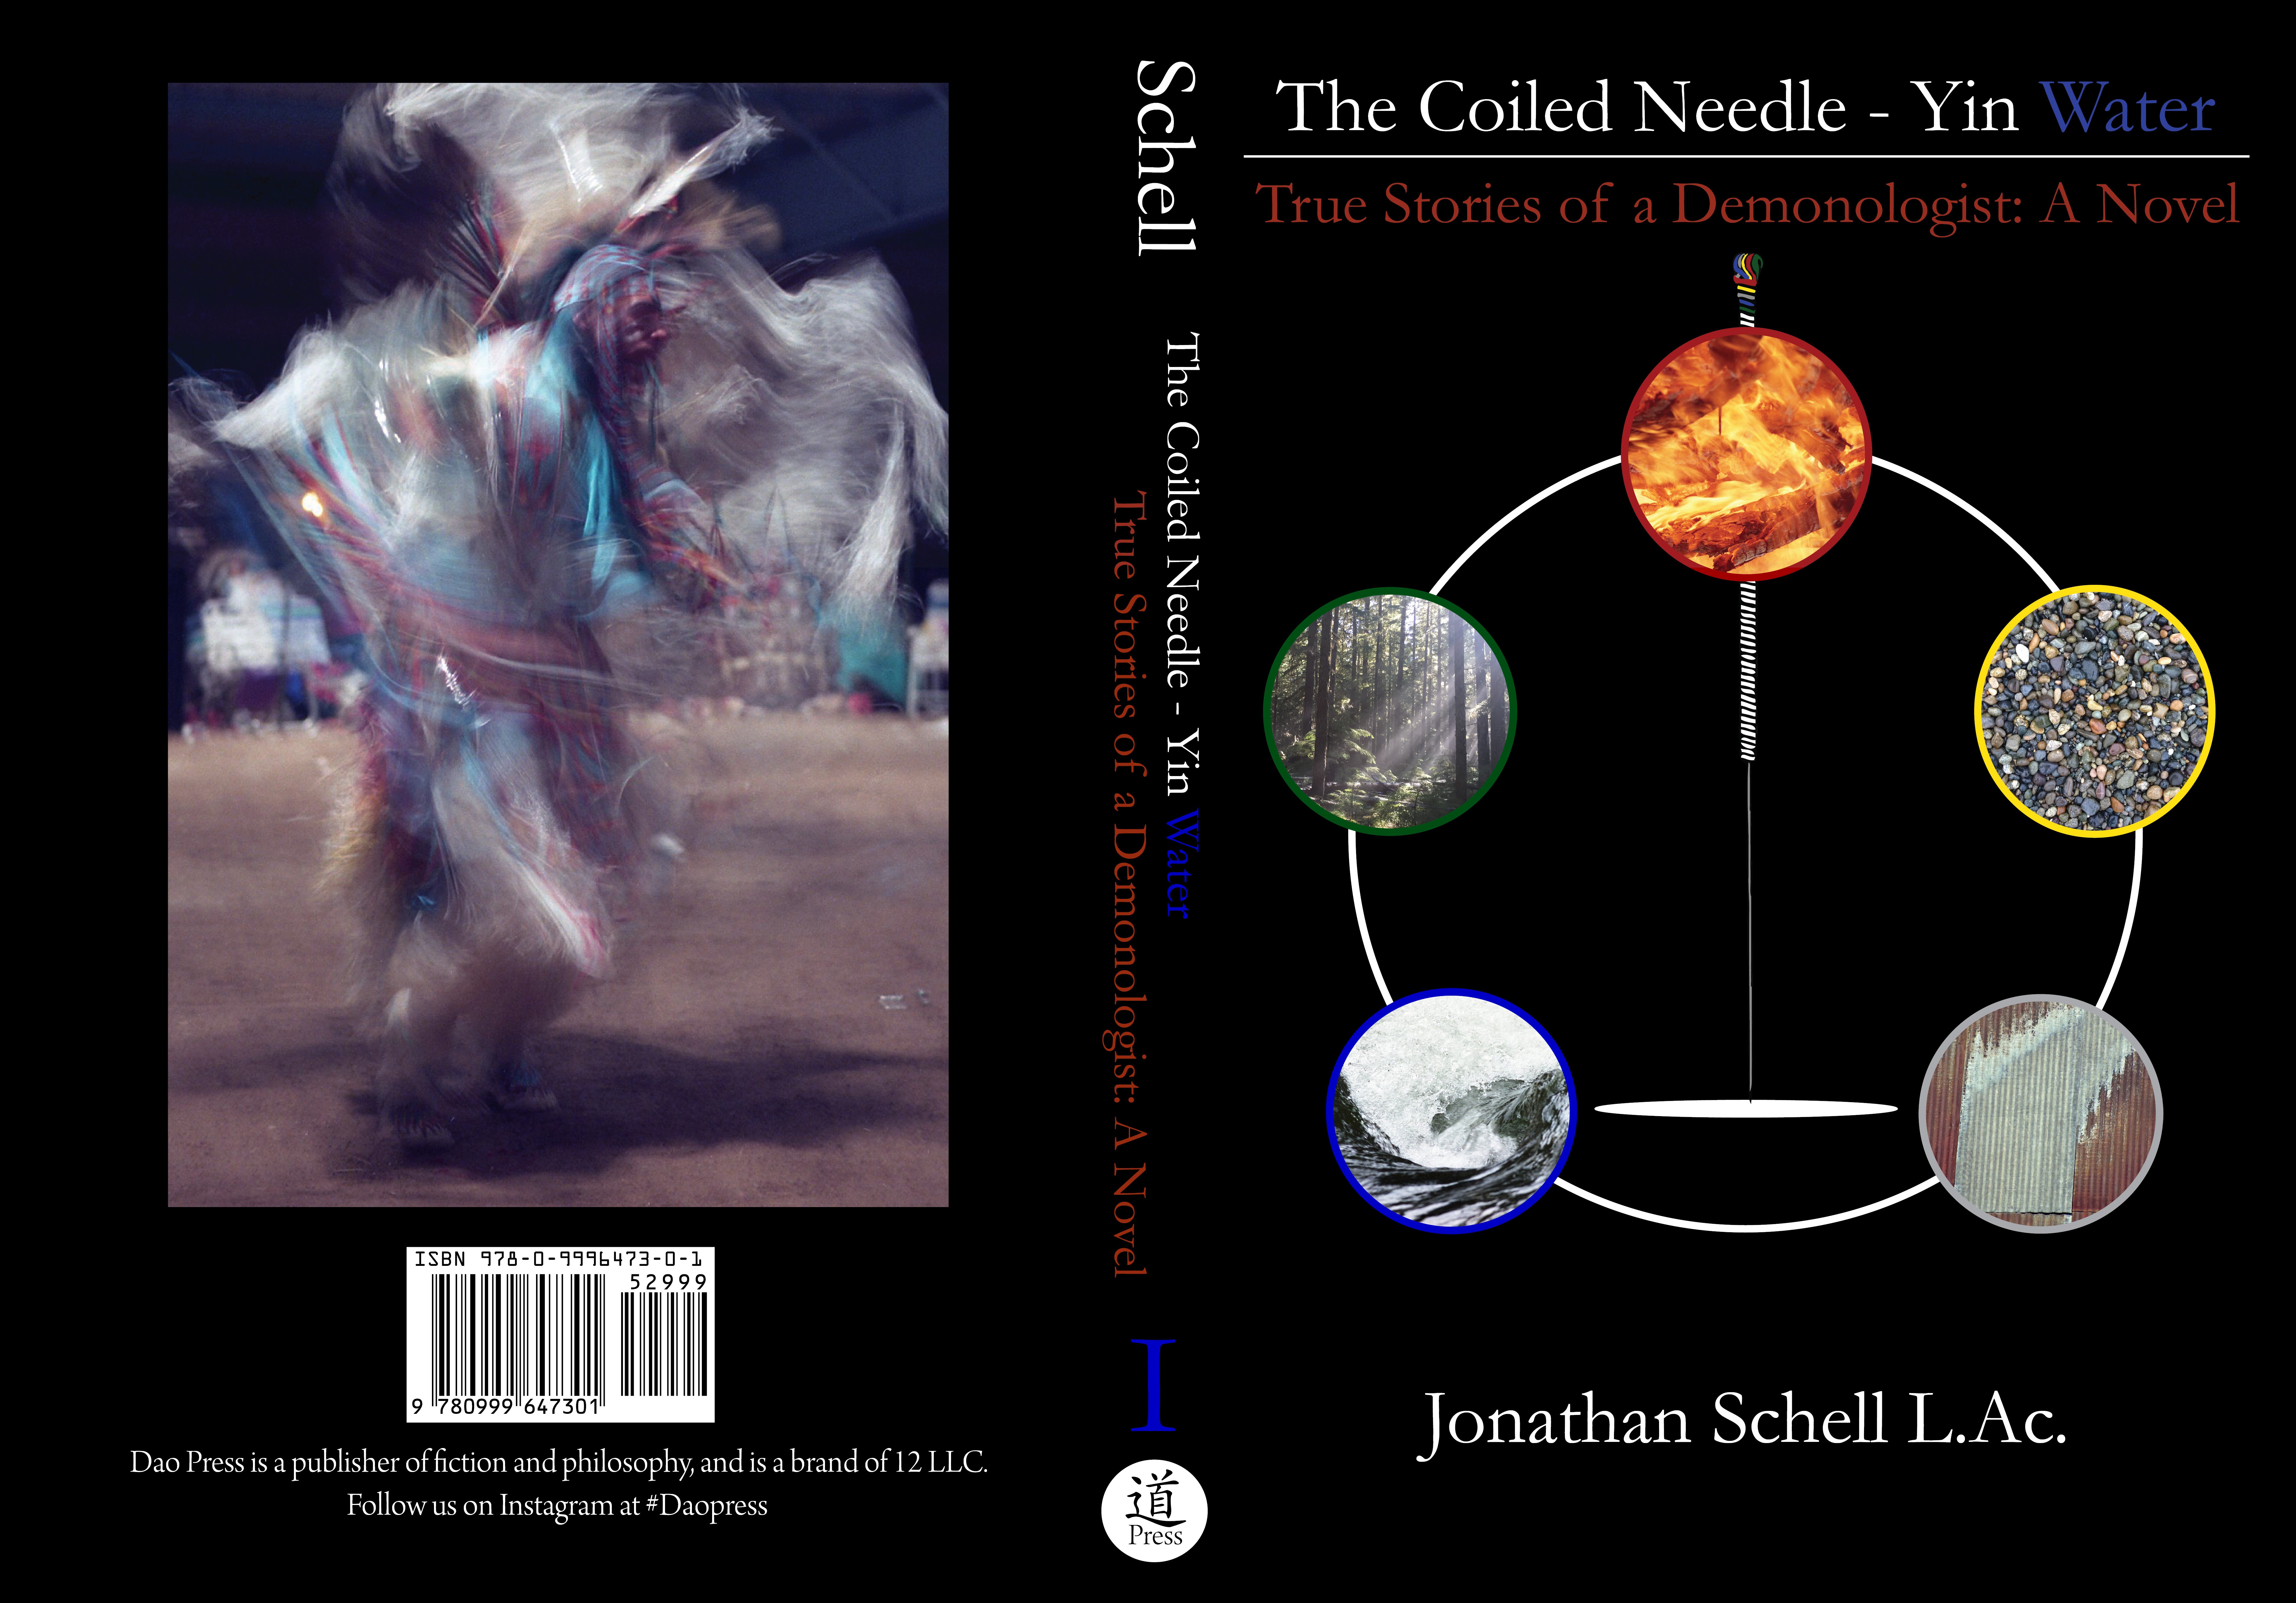 The Coiled Needle: Yin Water